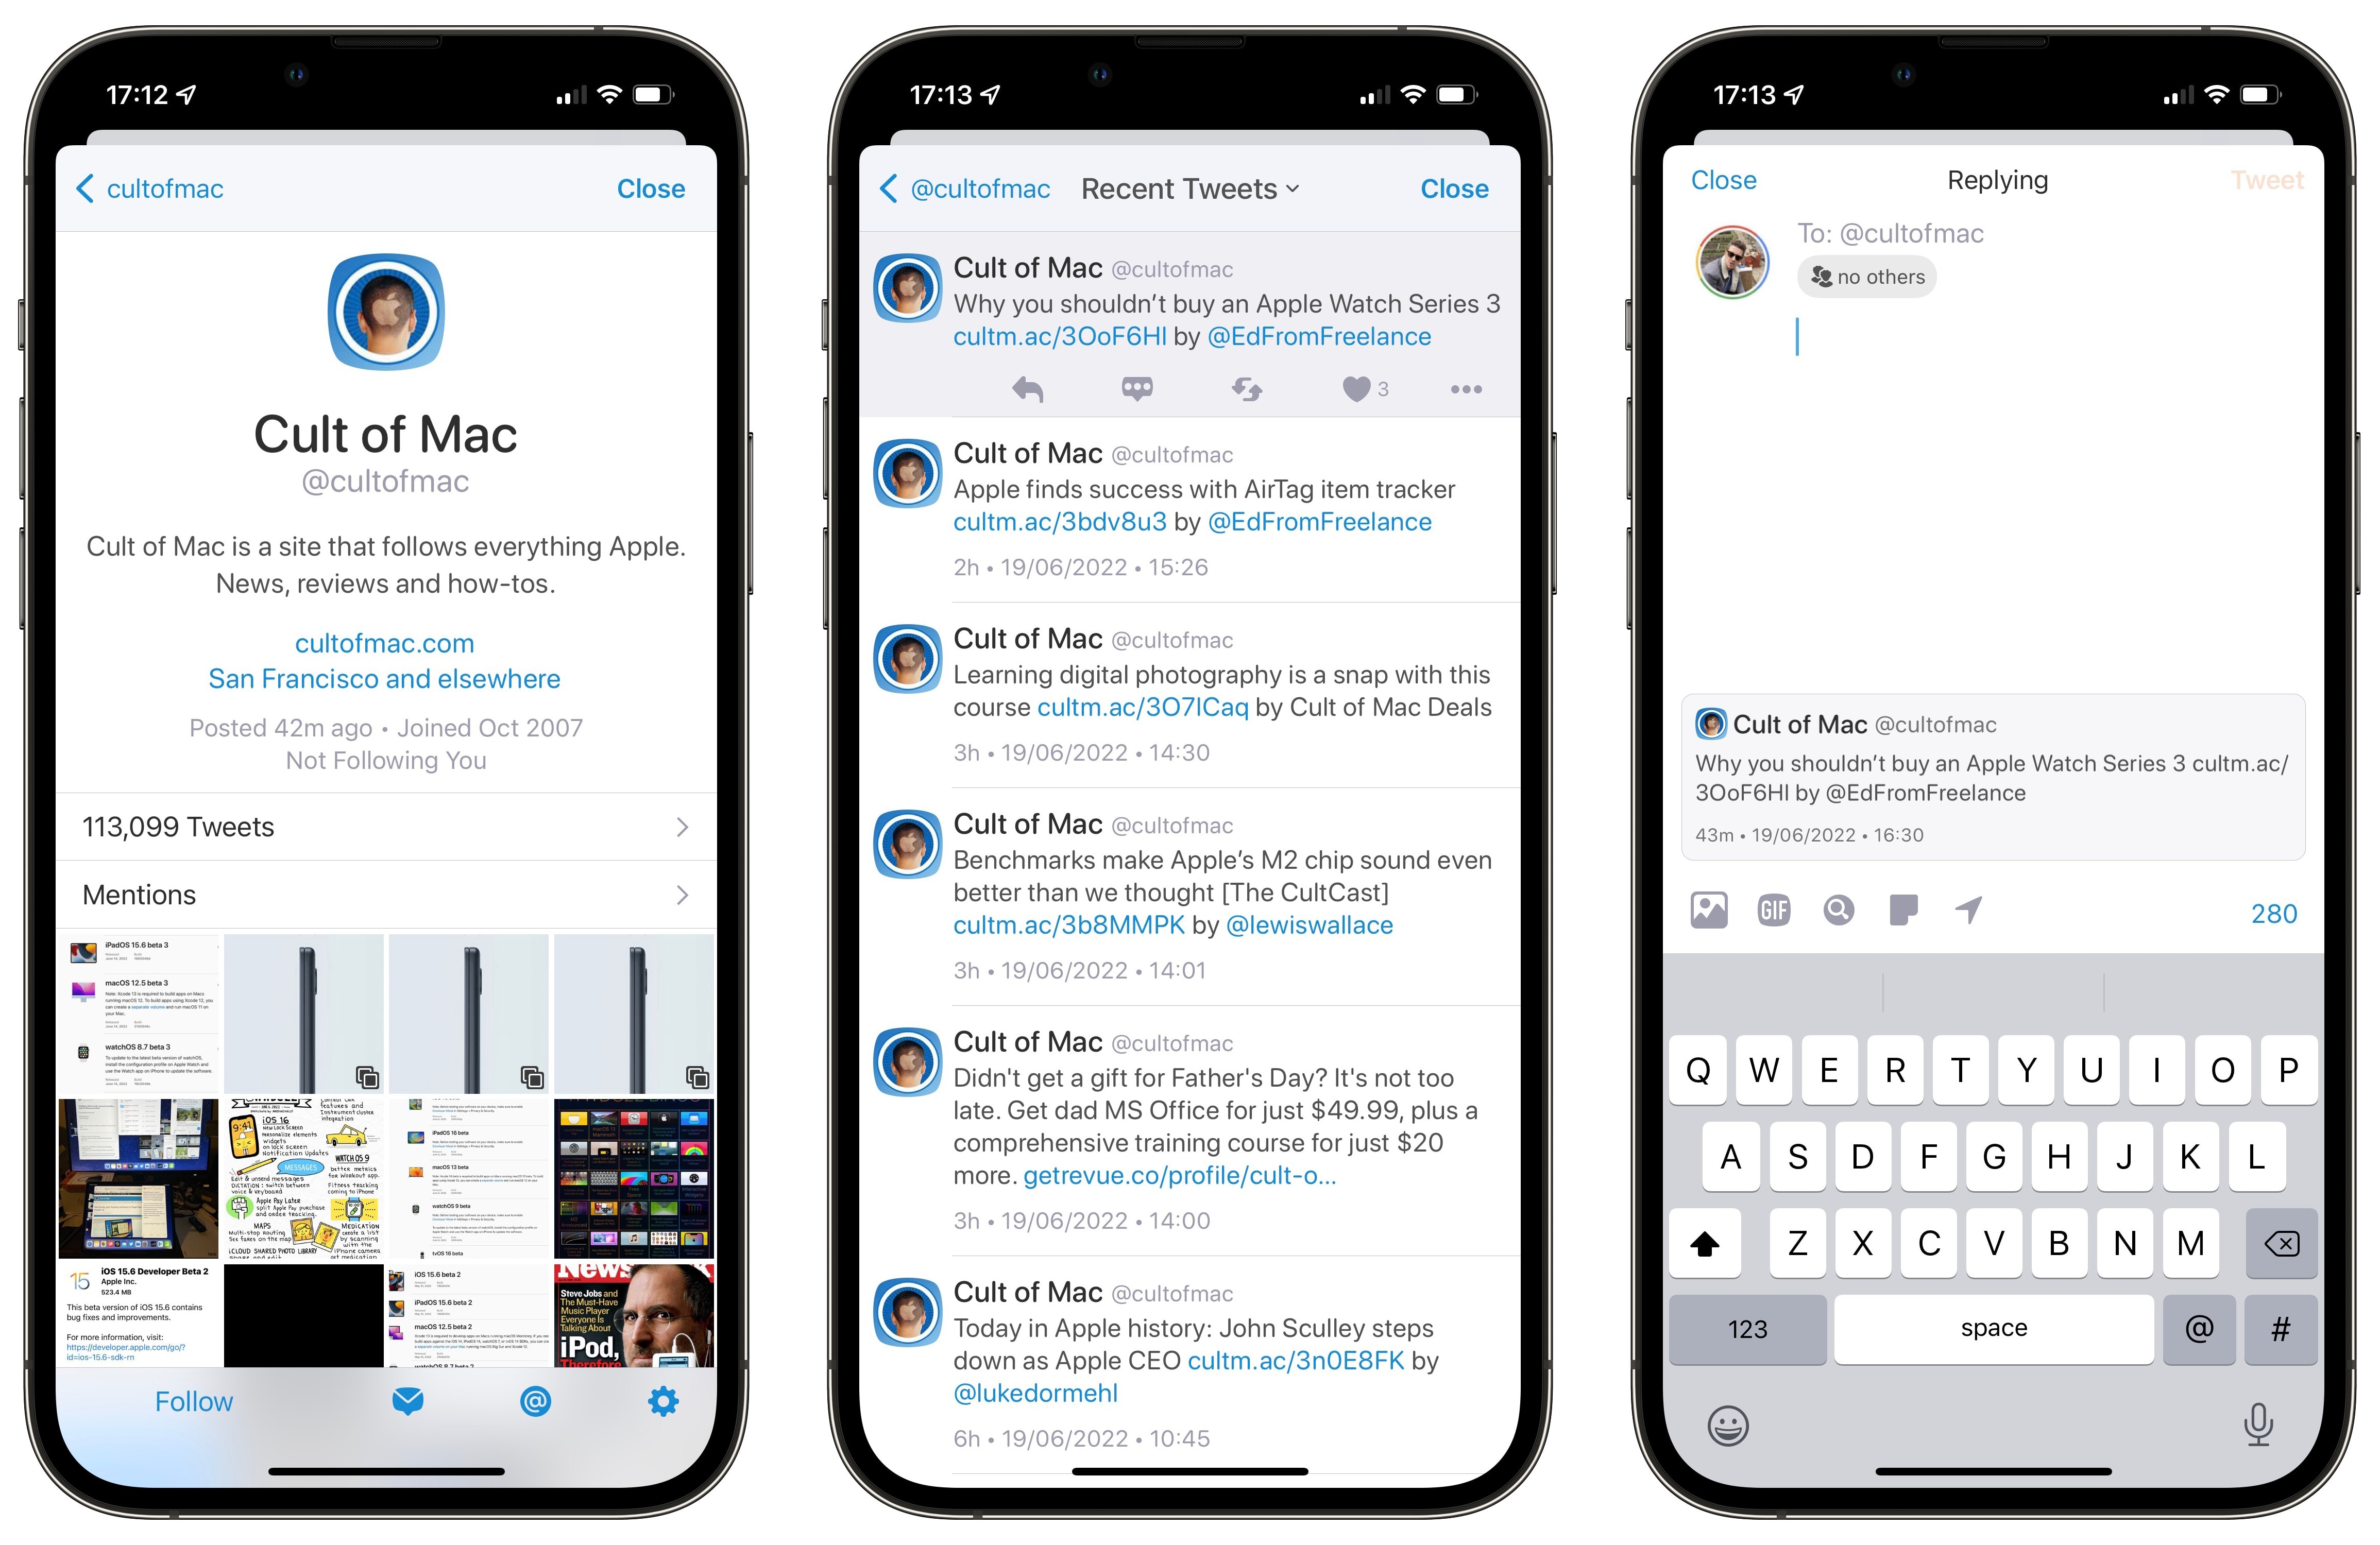 Best Twitter app is Twitterrific: See all your tweets in chronological order from the accounts you follow.